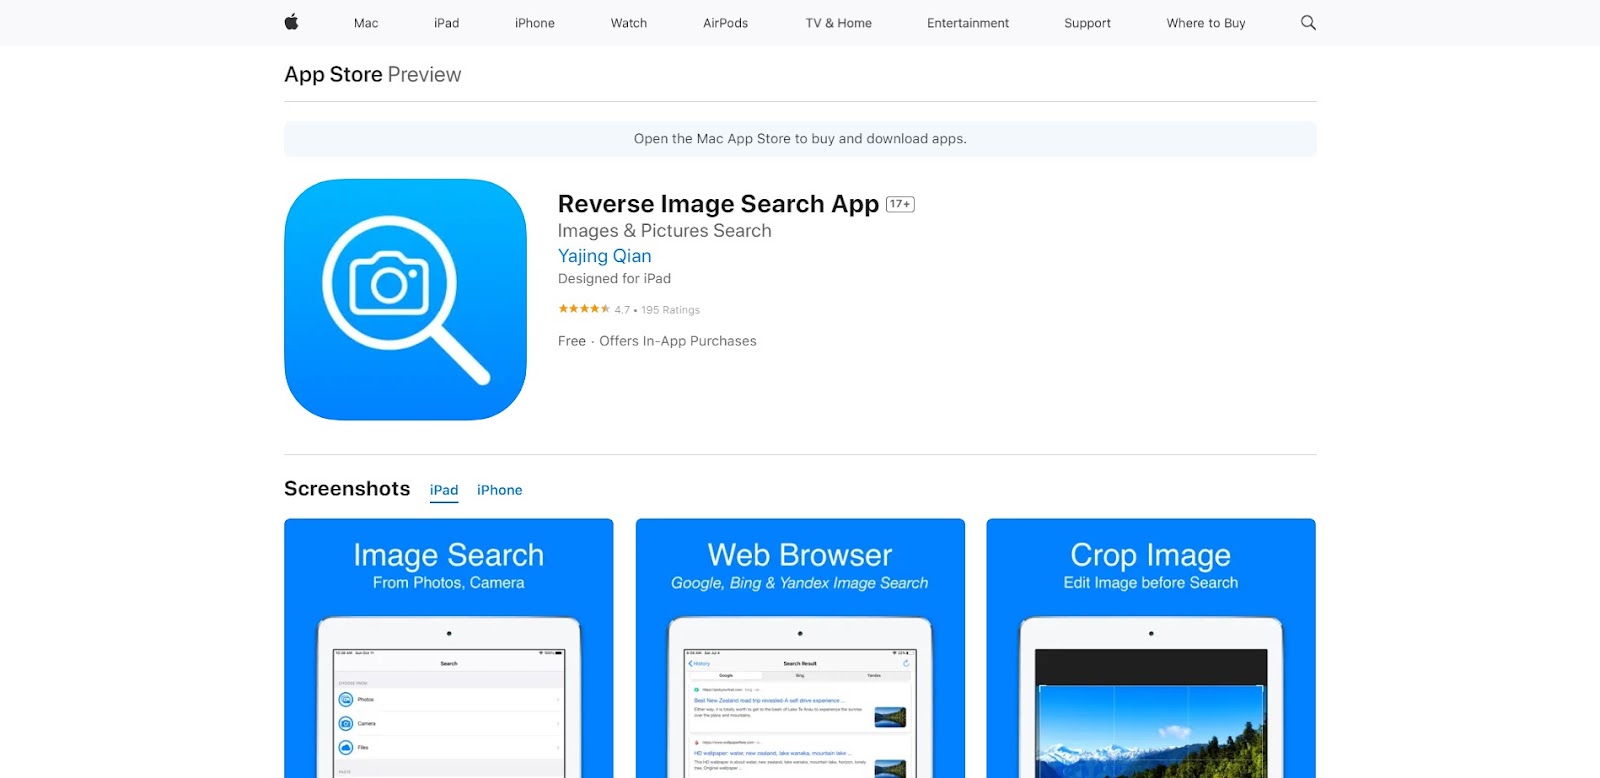 A screenshot of Reverse Image Search App's website